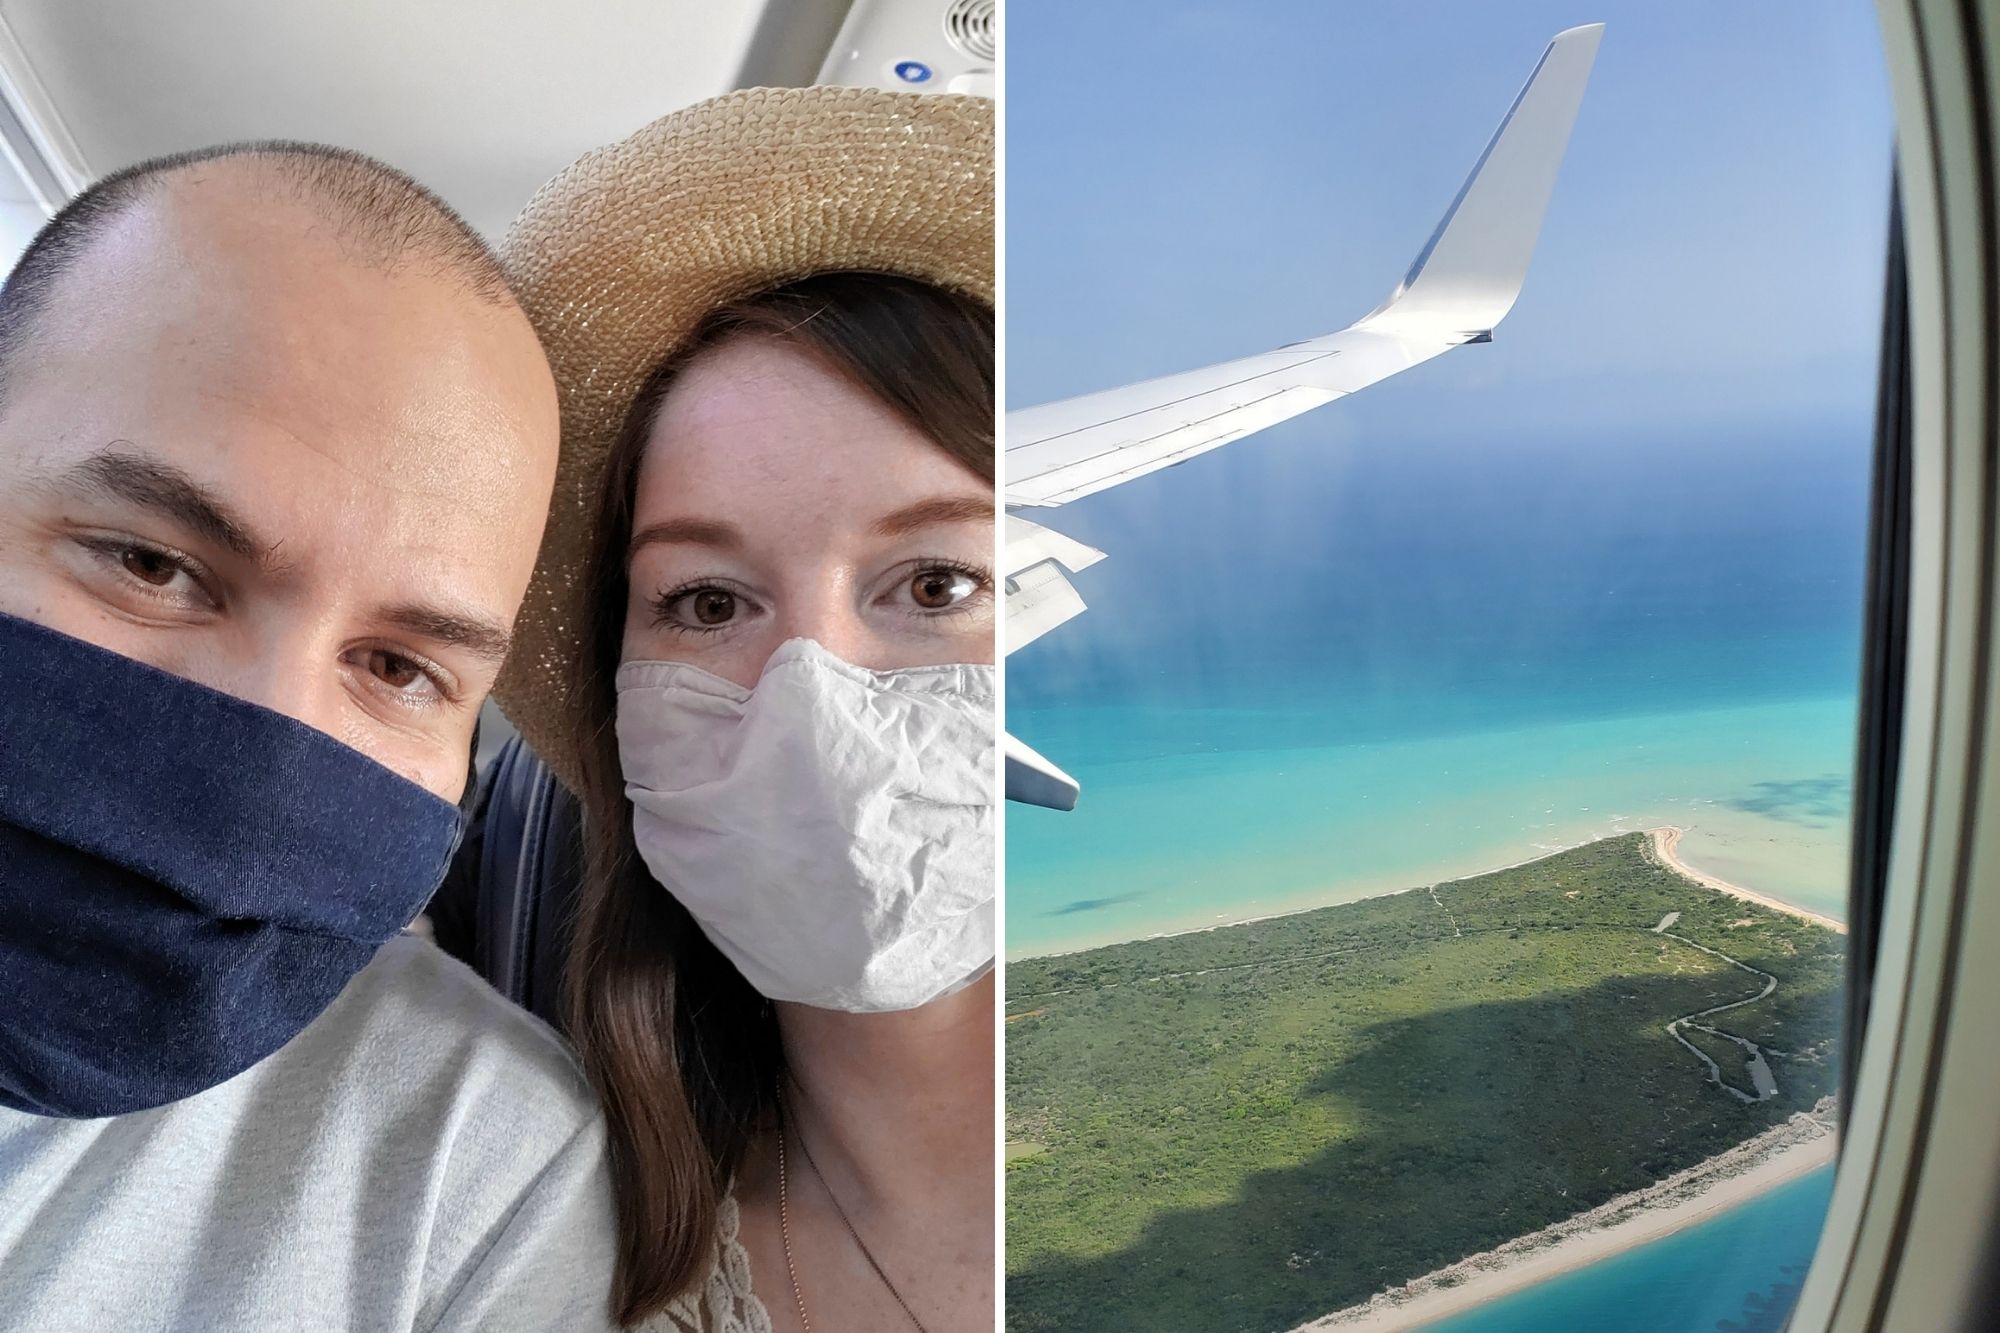 Left: Alyssa and Michael on the plane wearing masks; right: the view of St. Croix from the window - it's very green and the waters are turquoise 